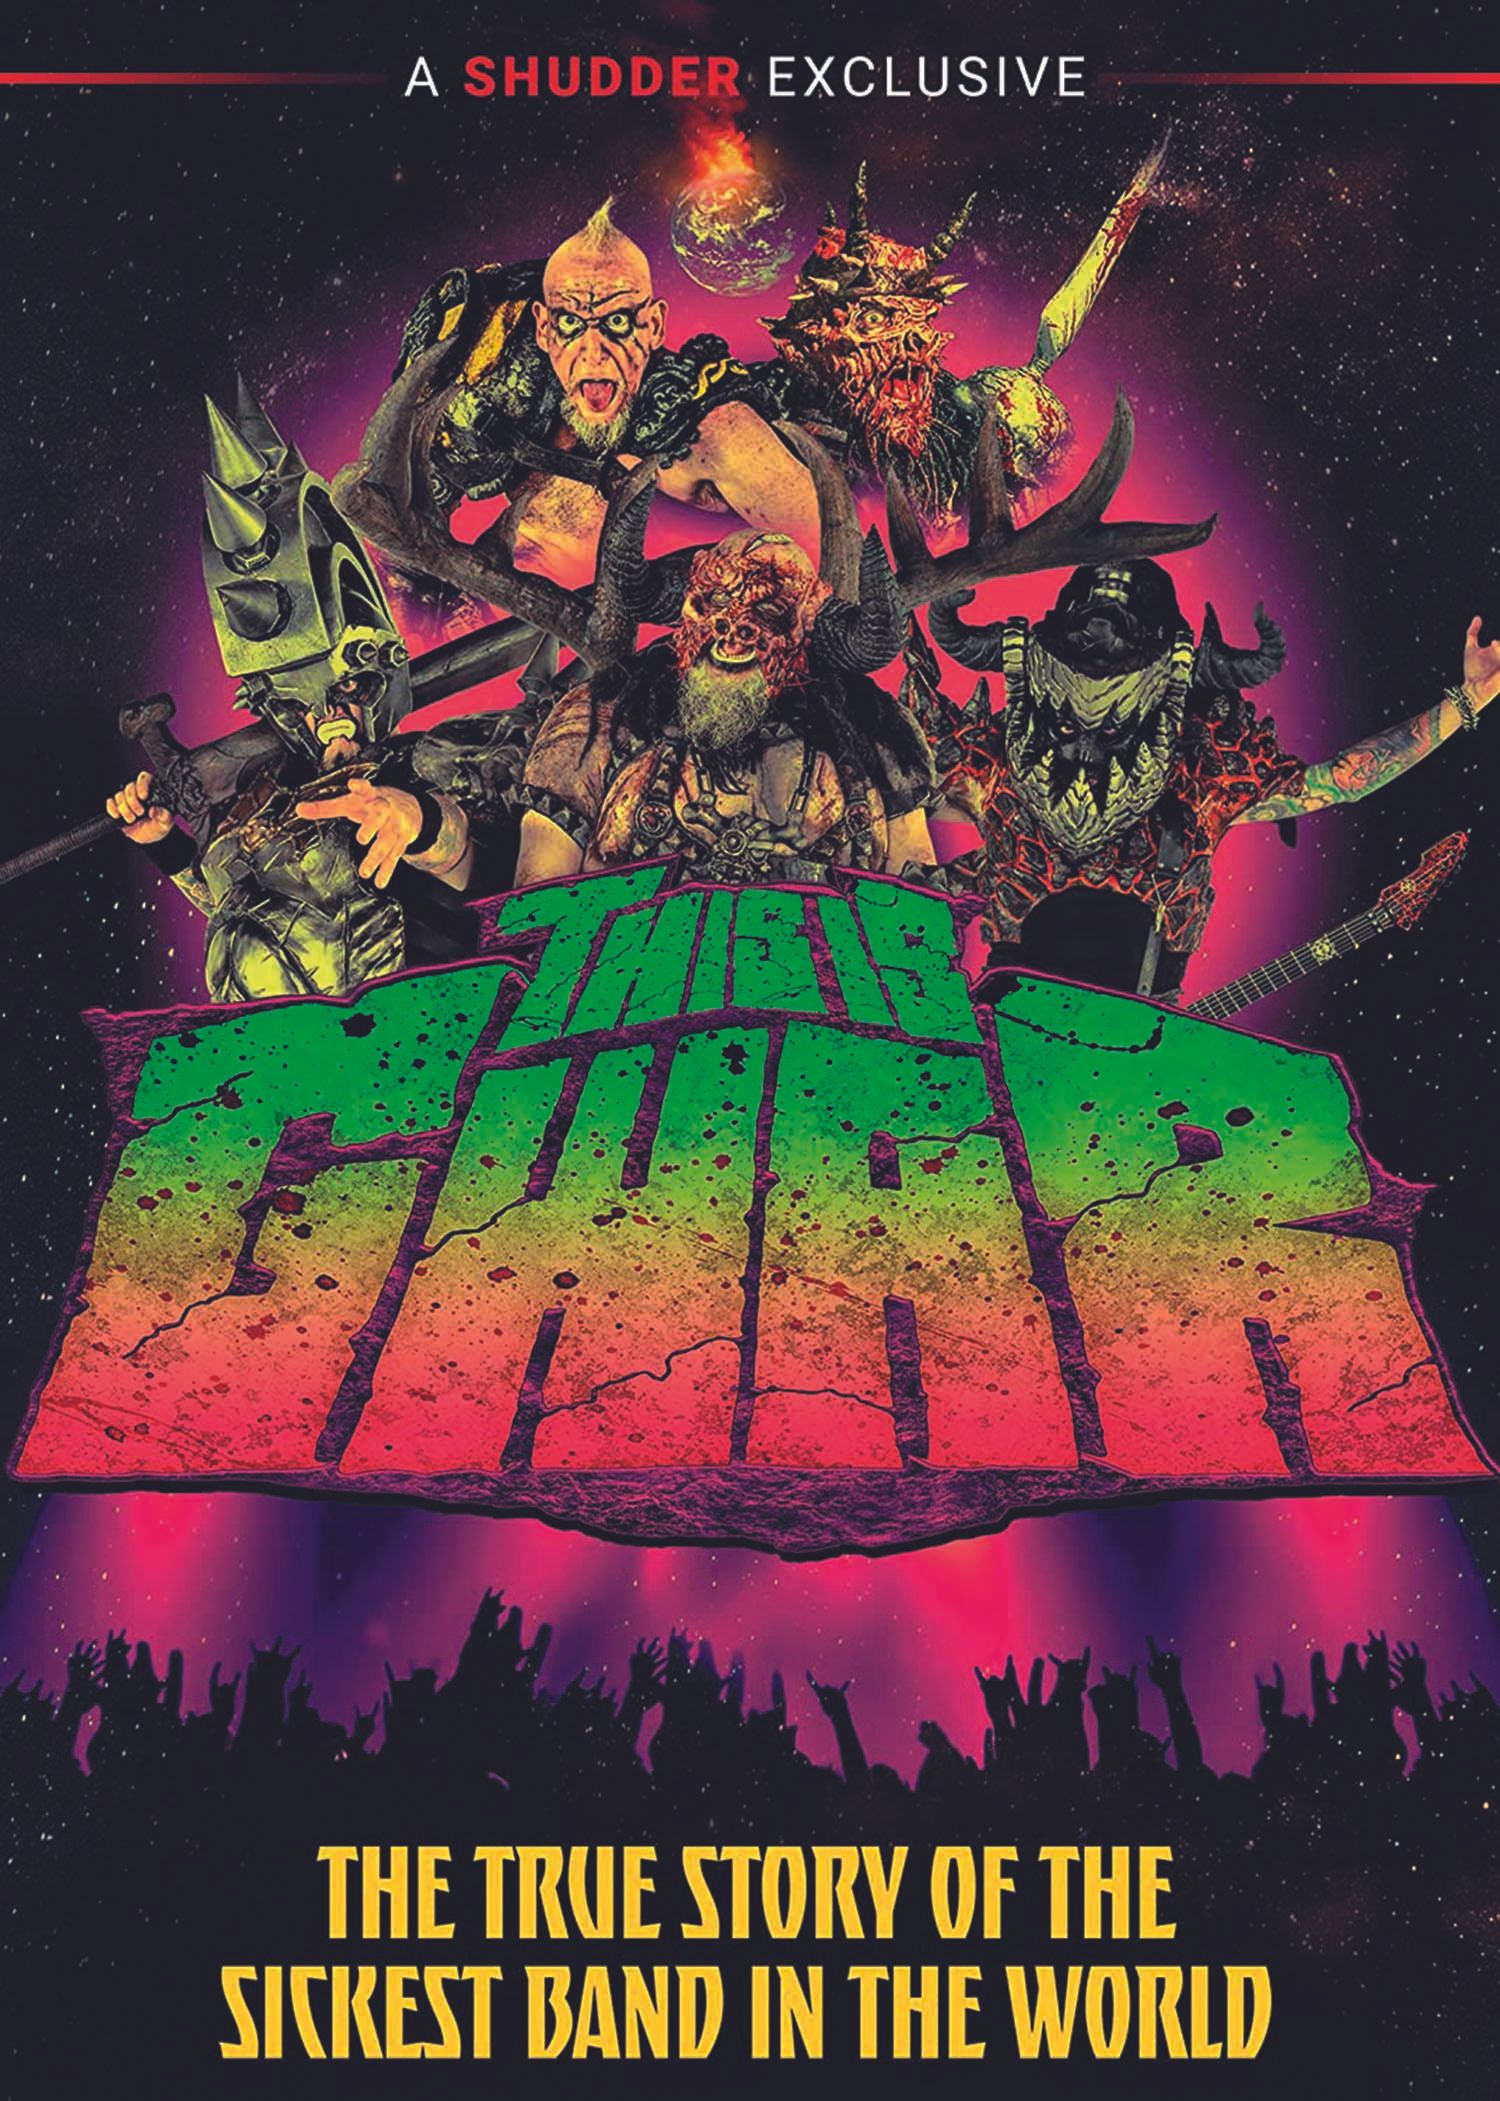 Gwar - The true story of the sickest Band in the world